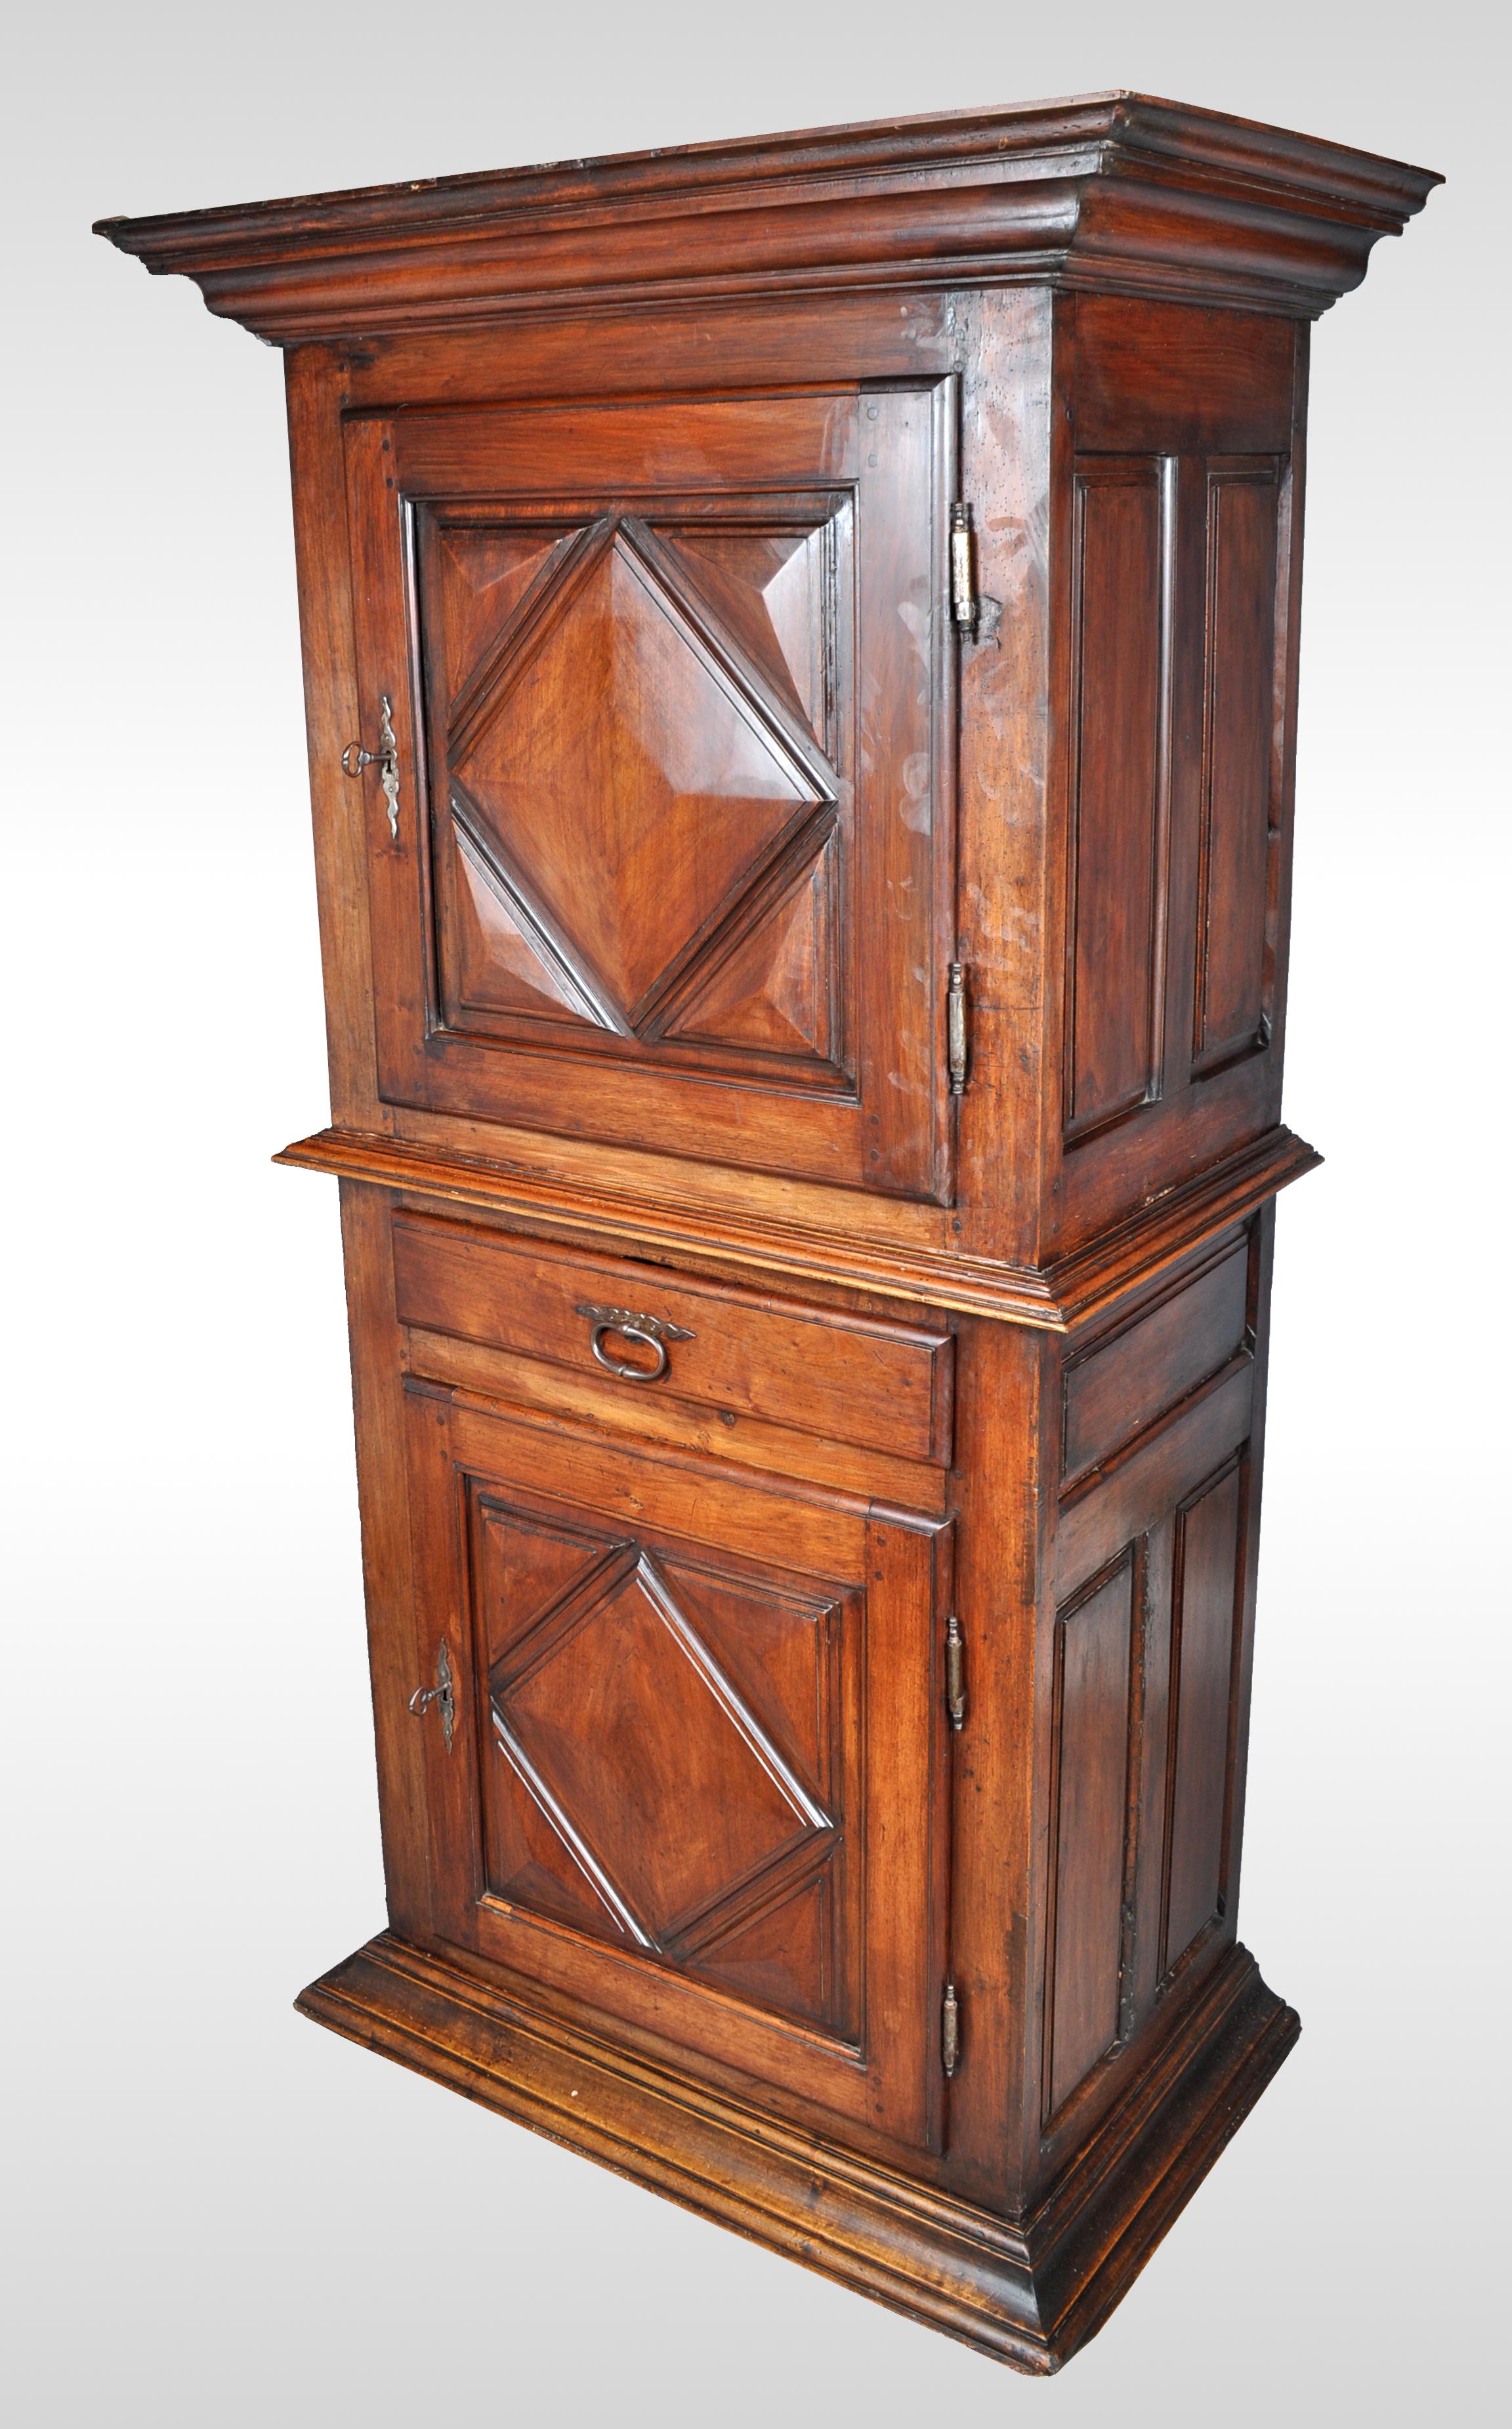 Hand-Carved Antique French Louis XIII Walnut Cabinet / Armoire / Bonnetiere, circa 1750